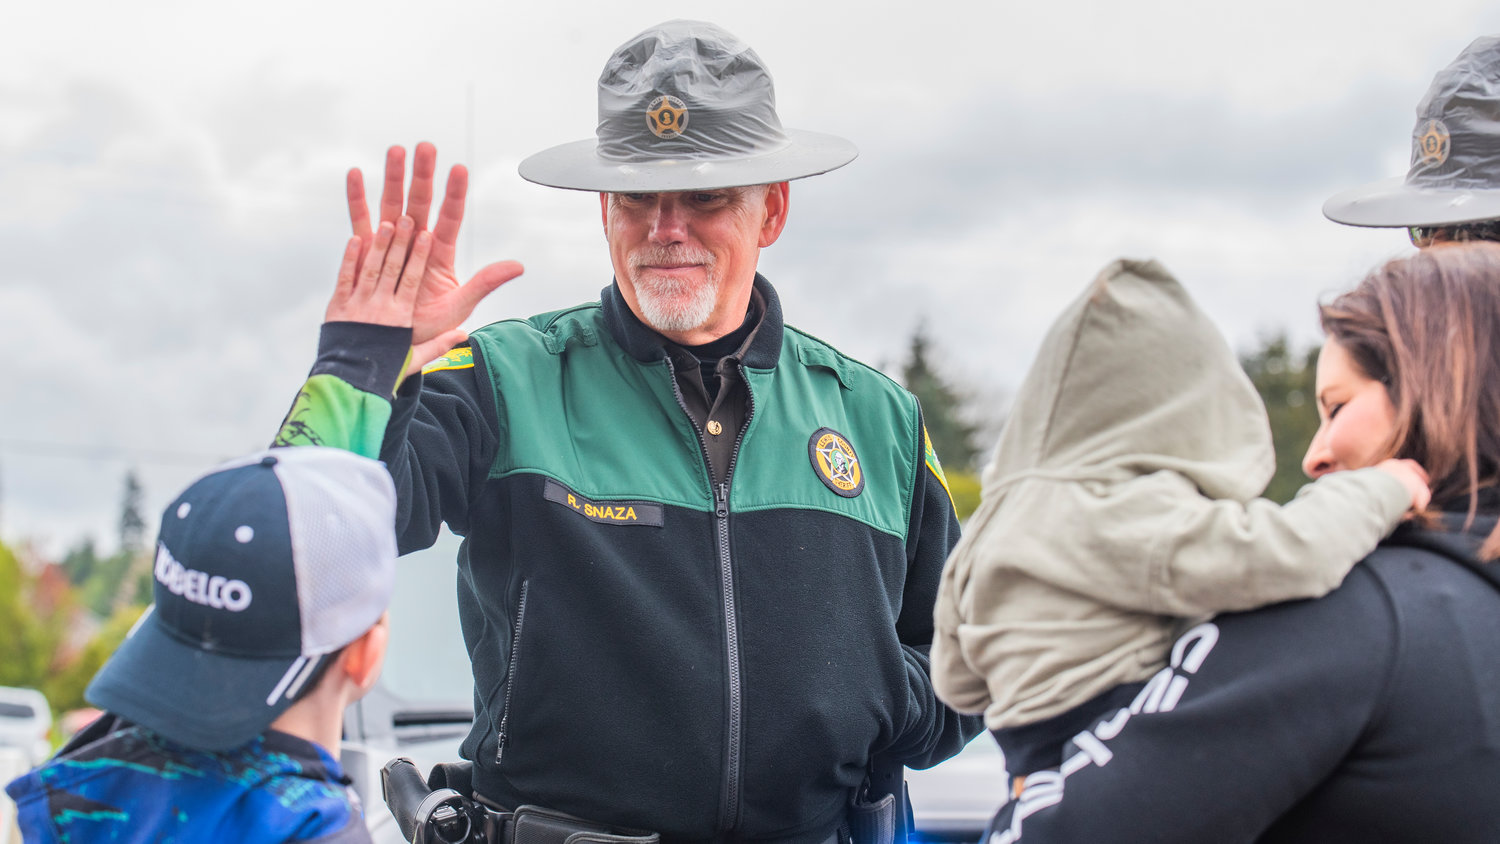 Sheriff Rob Snaza receives a high-five during the Vader May Day Parade Saturday morning.